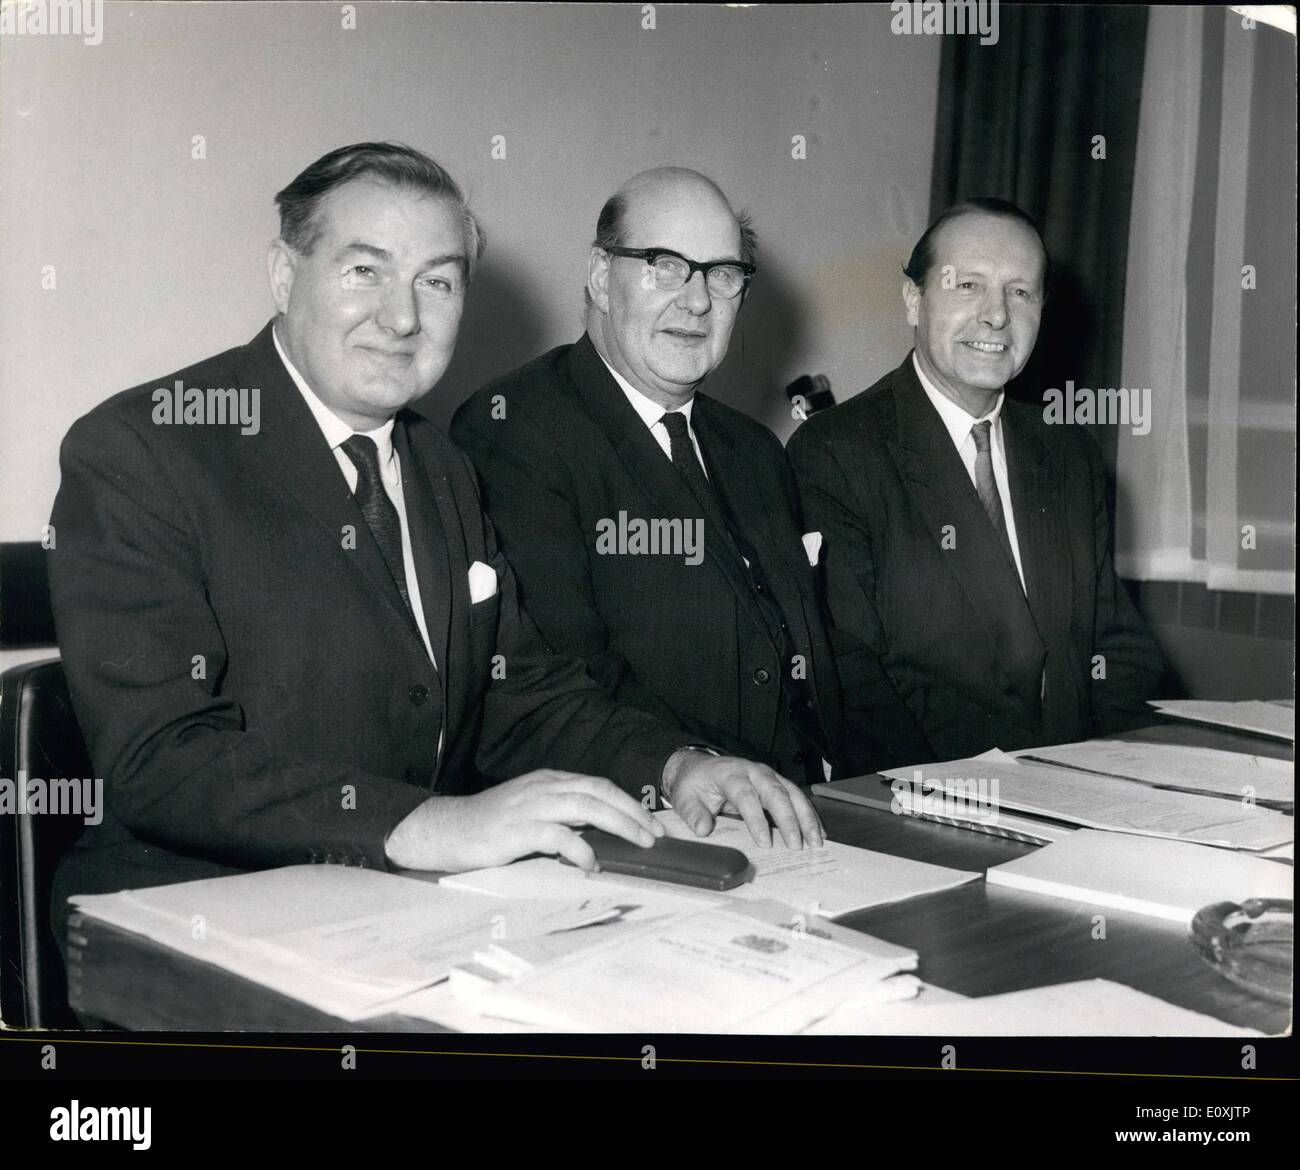 Feb. 02, 1967 - First meeting of the decimal committee : The first meeting of the decimal committee, tock place this afternoon at standard house, northumberland avenue, in London. photo shows (L to R) Mr. James Callaghan, the chancellor of the exchequer Sir William Fisk, c.b.e. (chairman) , and Lord Errell of Hale (deputy chairman), at the meeting today. Stock Photo